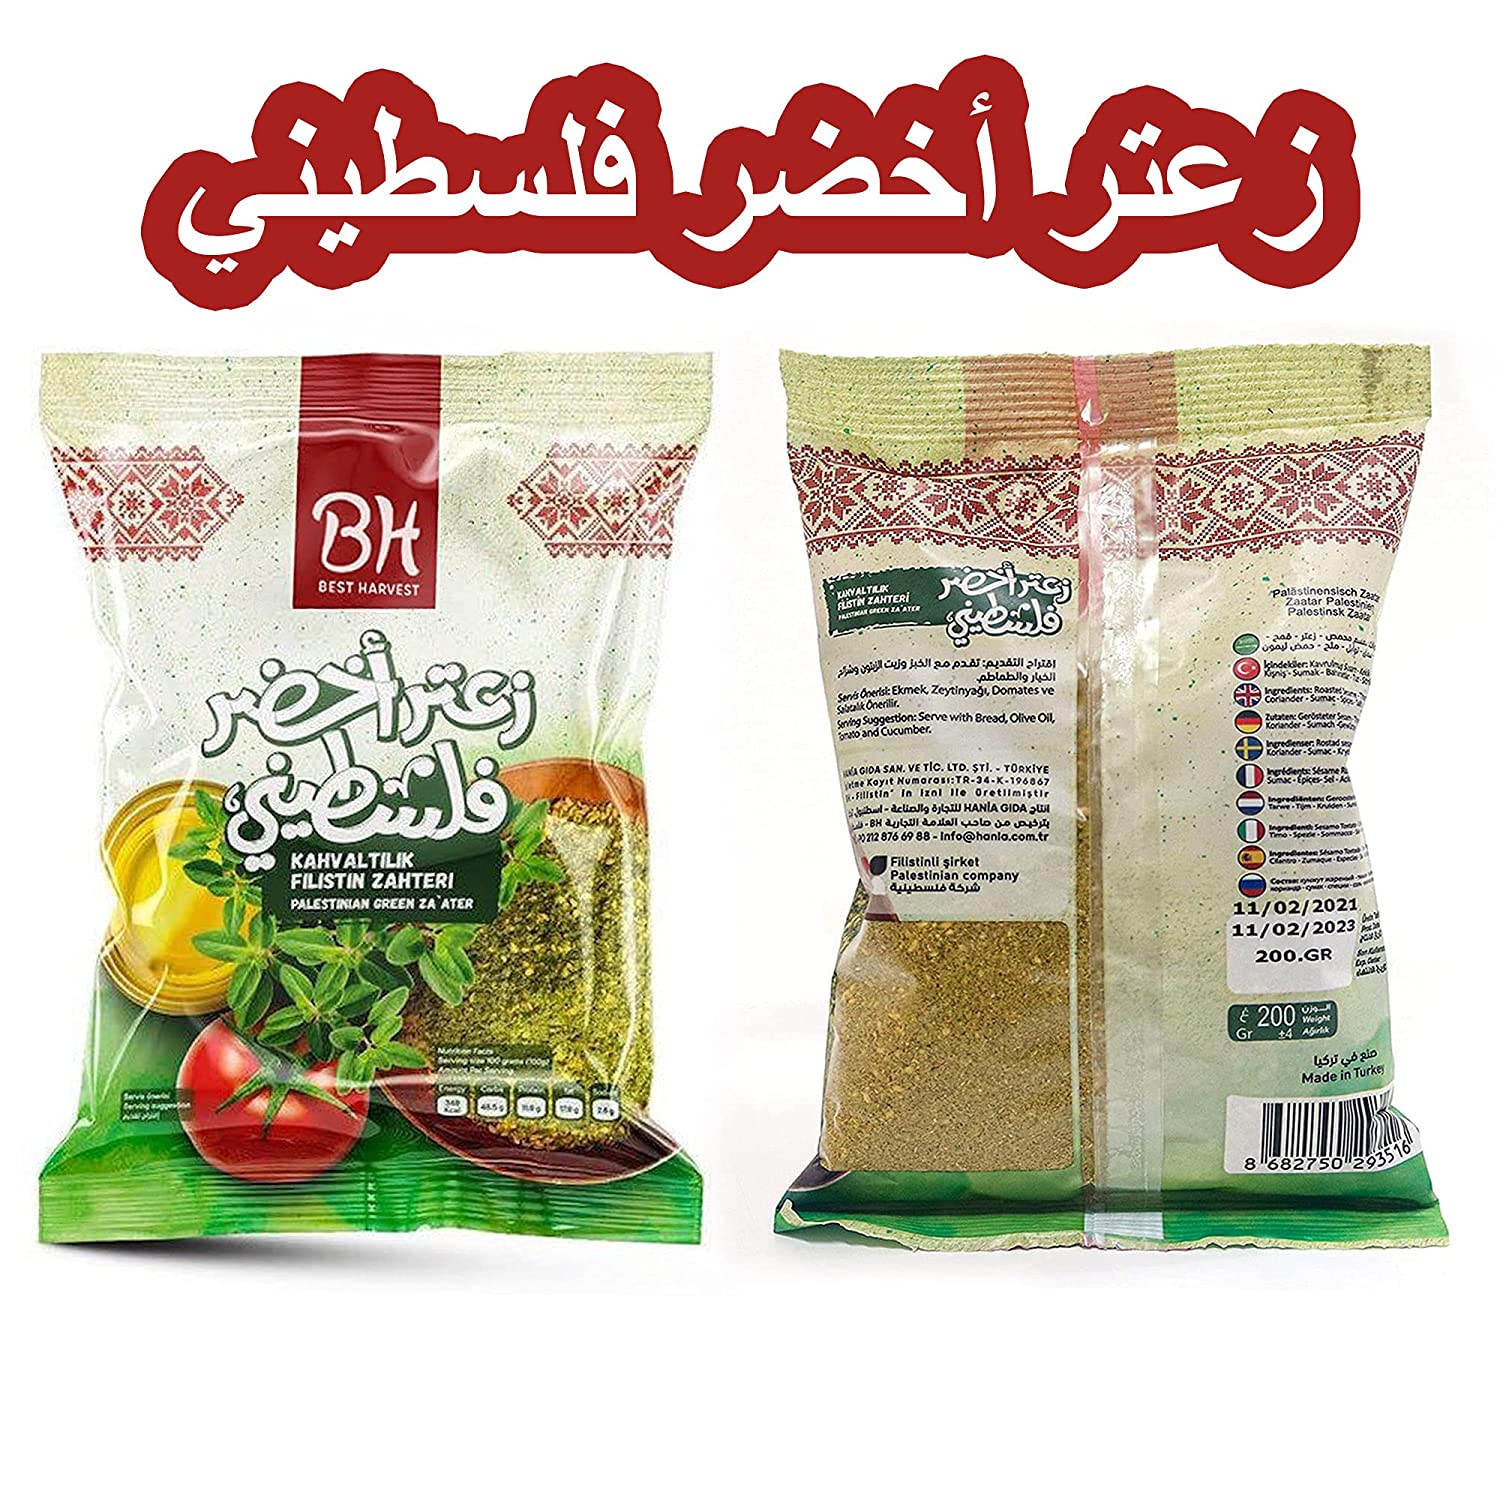 B.H Spices - Palestinian Green Za'ater 200g